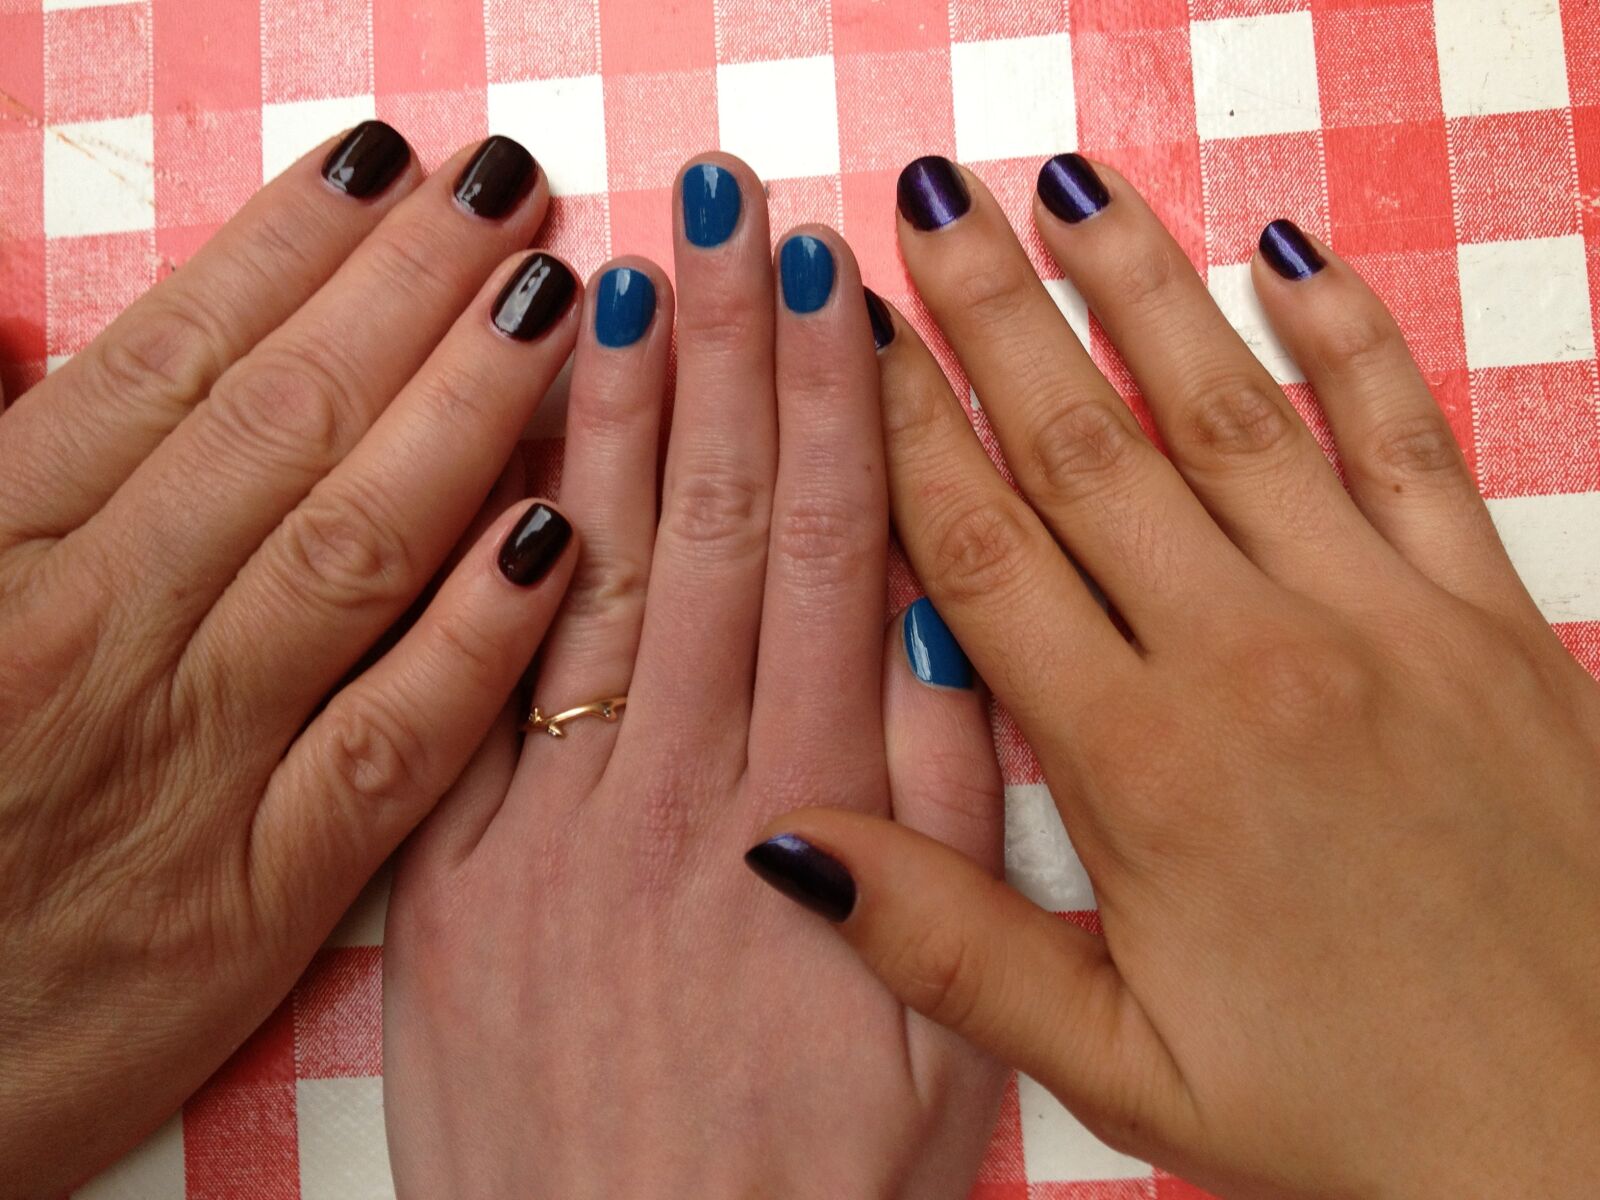 Apple iPhone 4S sample photo. Family, nails, toghether photography